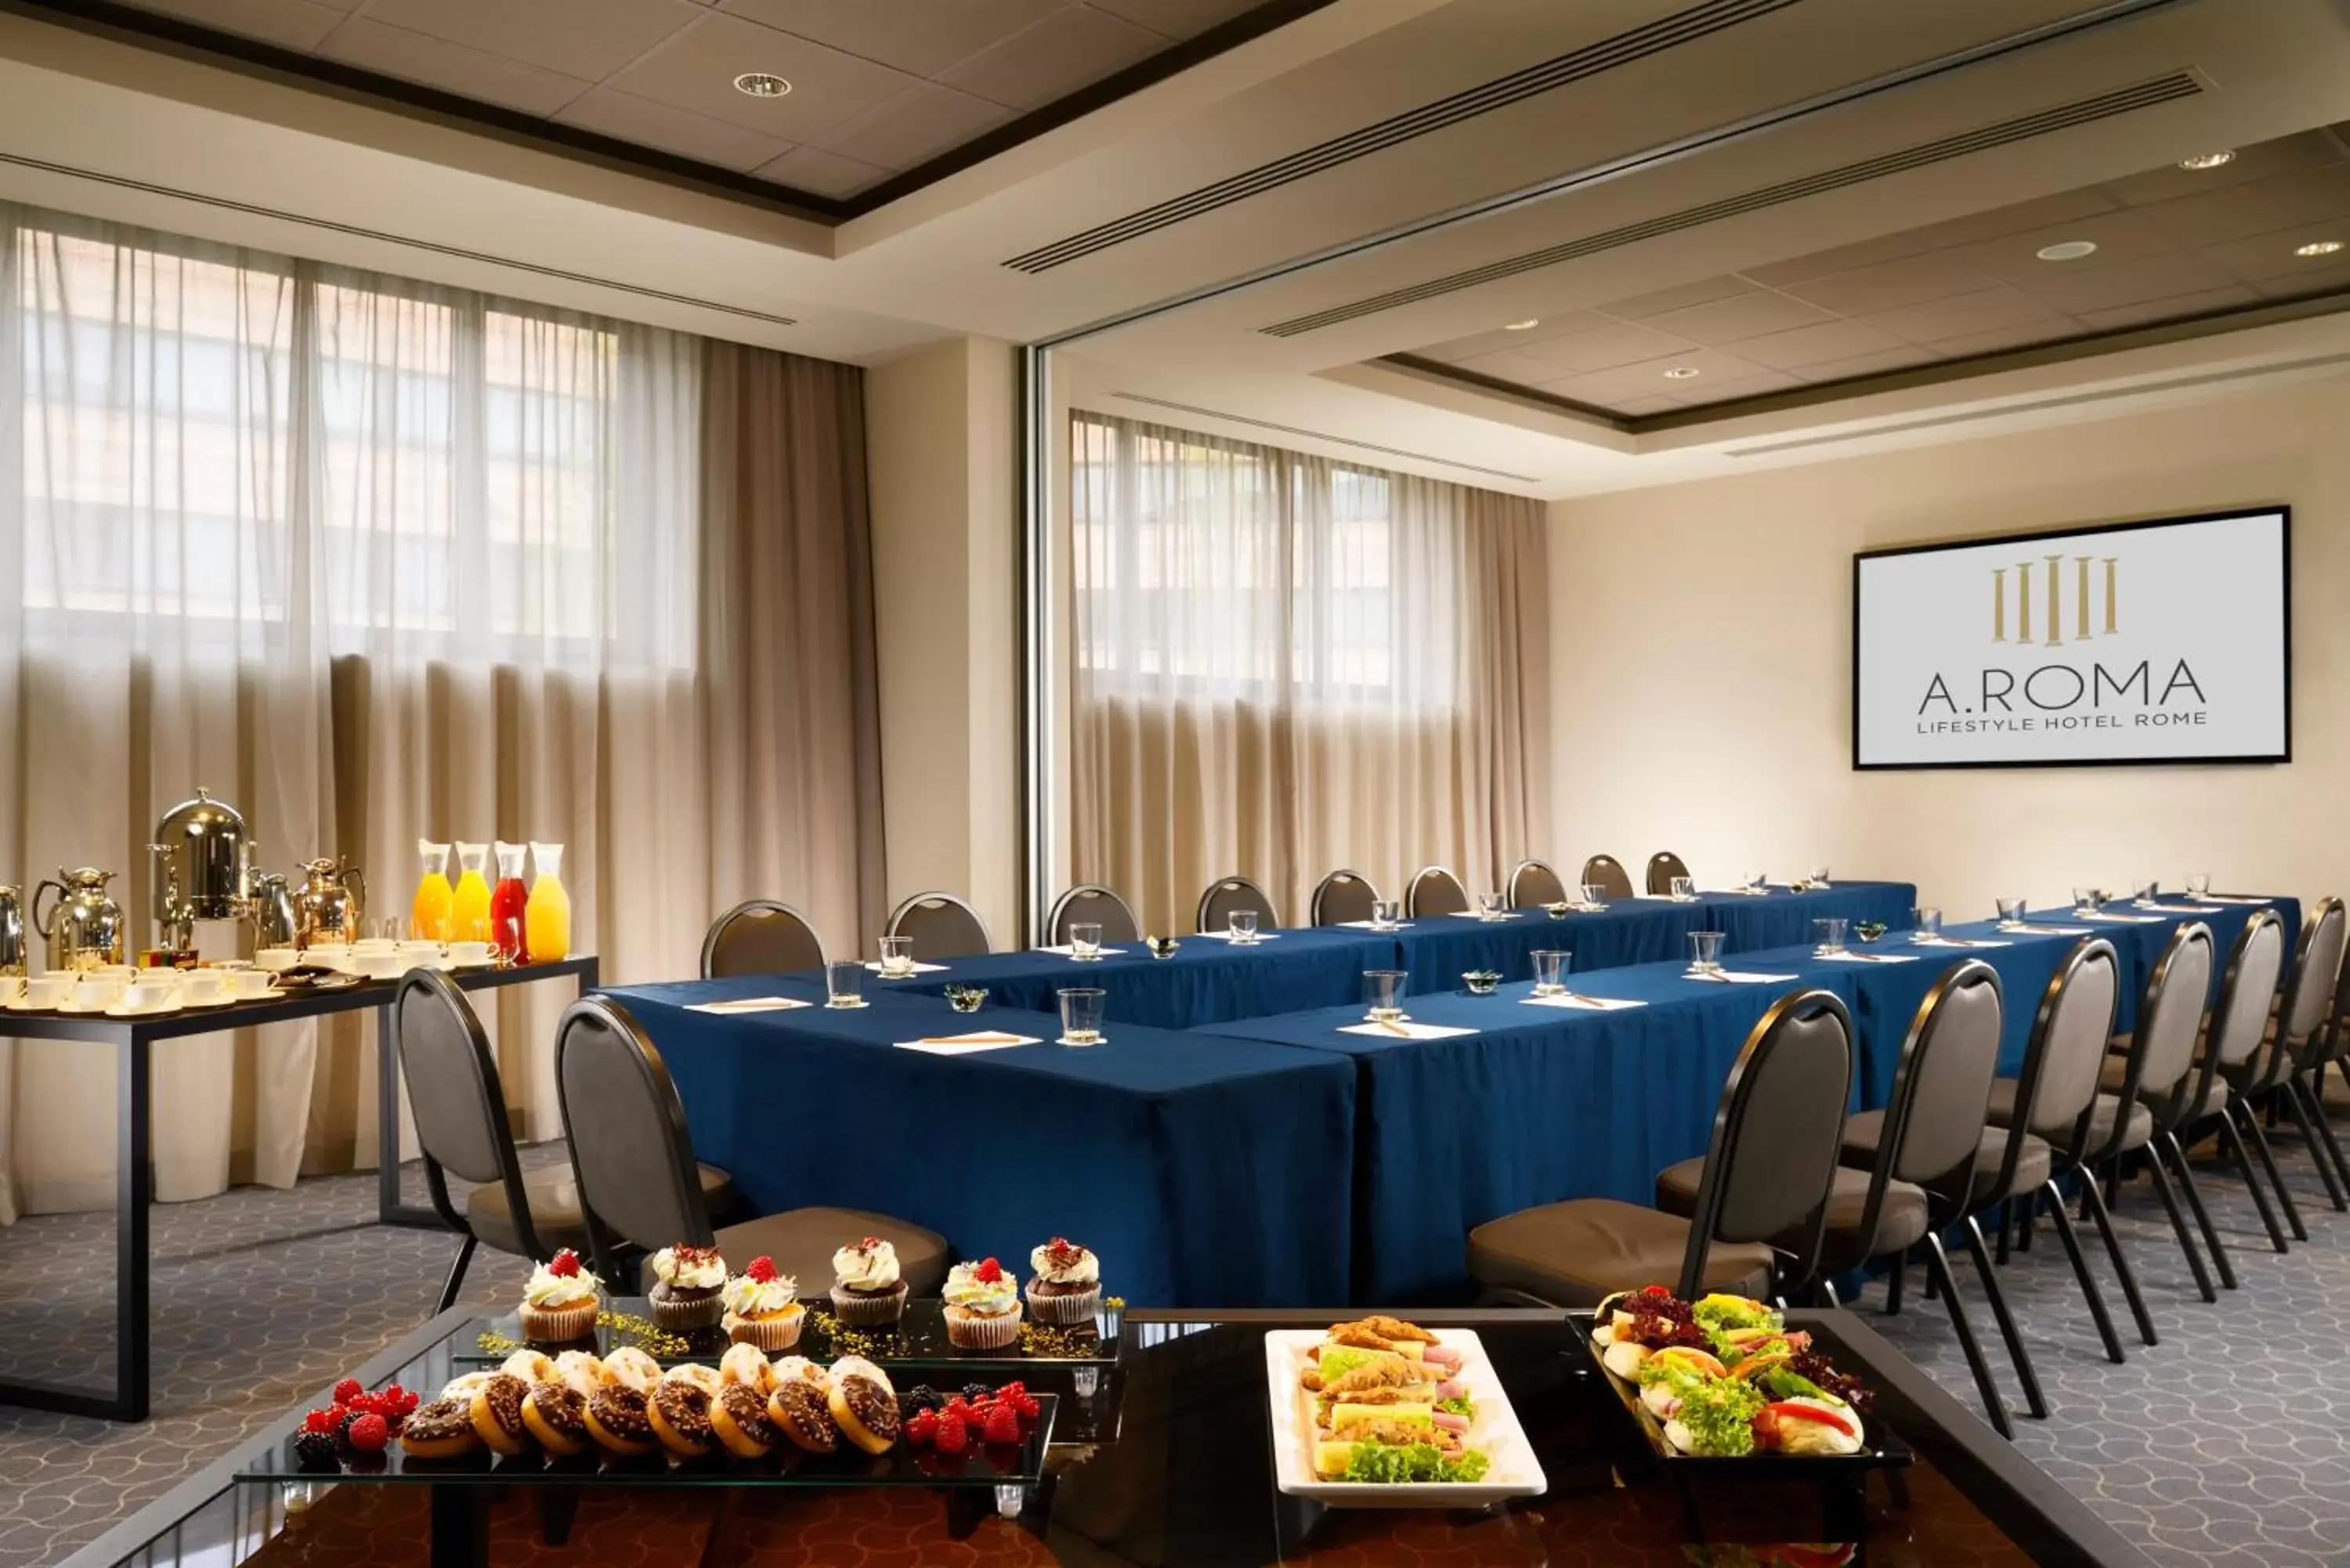 Meeting/conference room in A.Roma Lifestyle Hotel